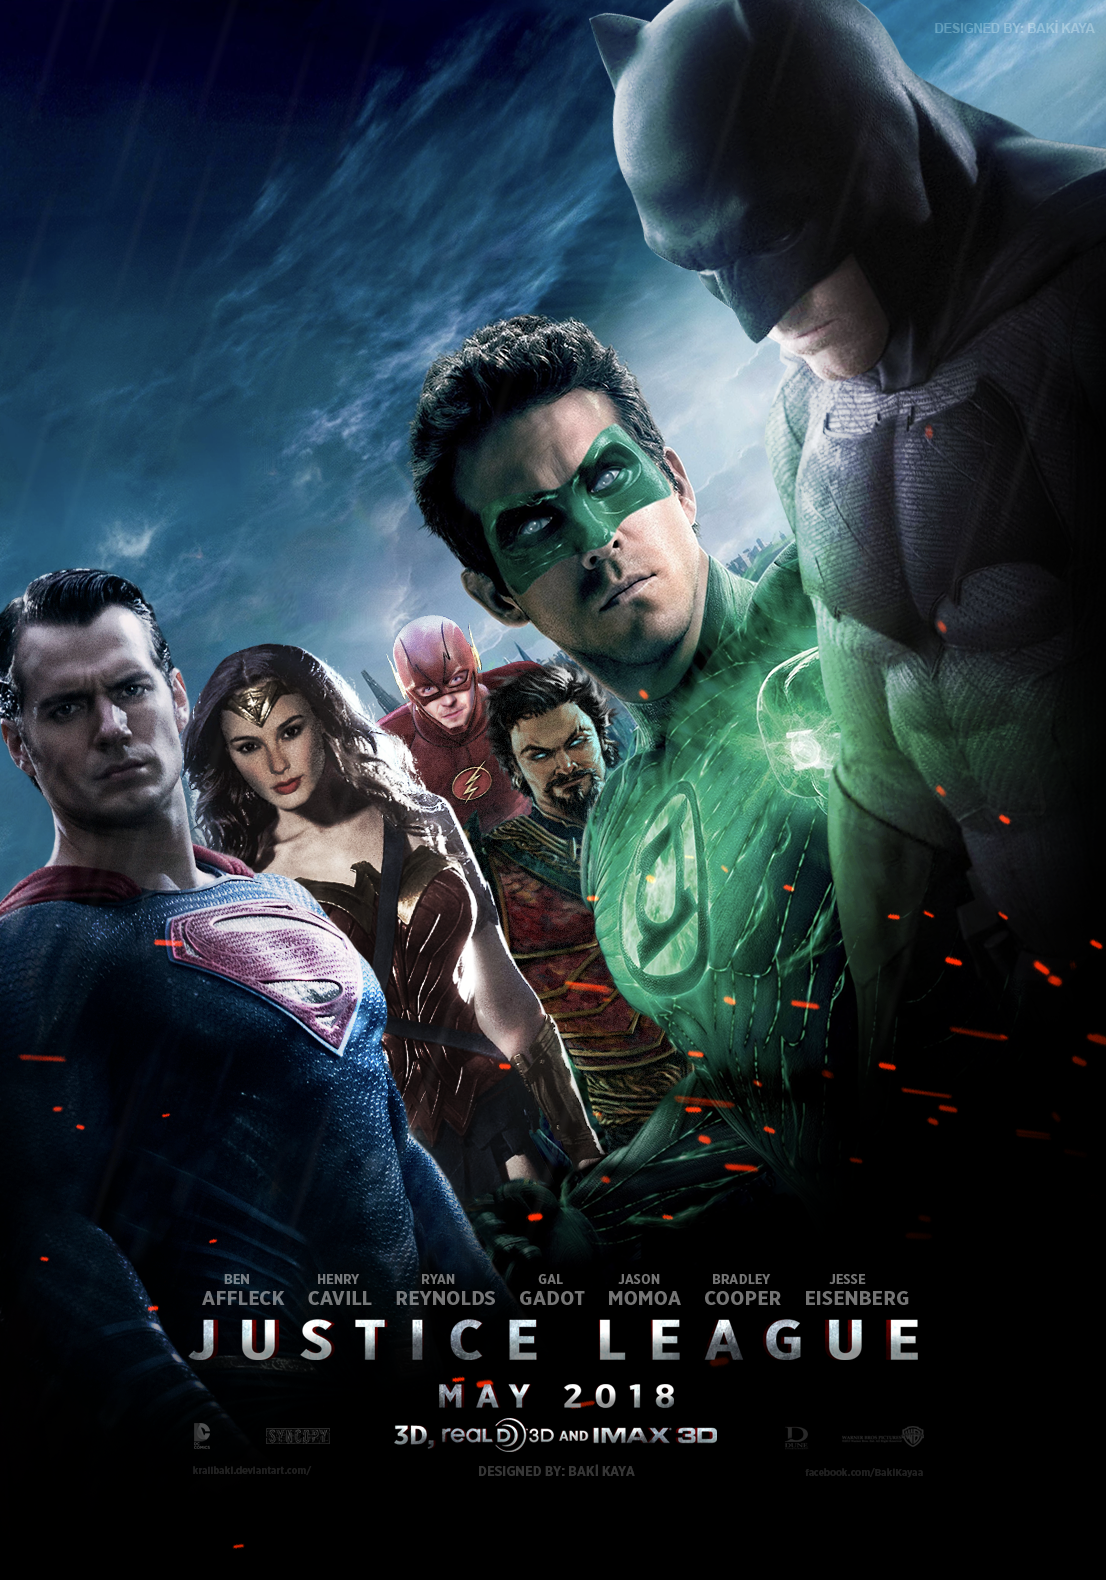 Justice League 2018 Poster by krallbaki on